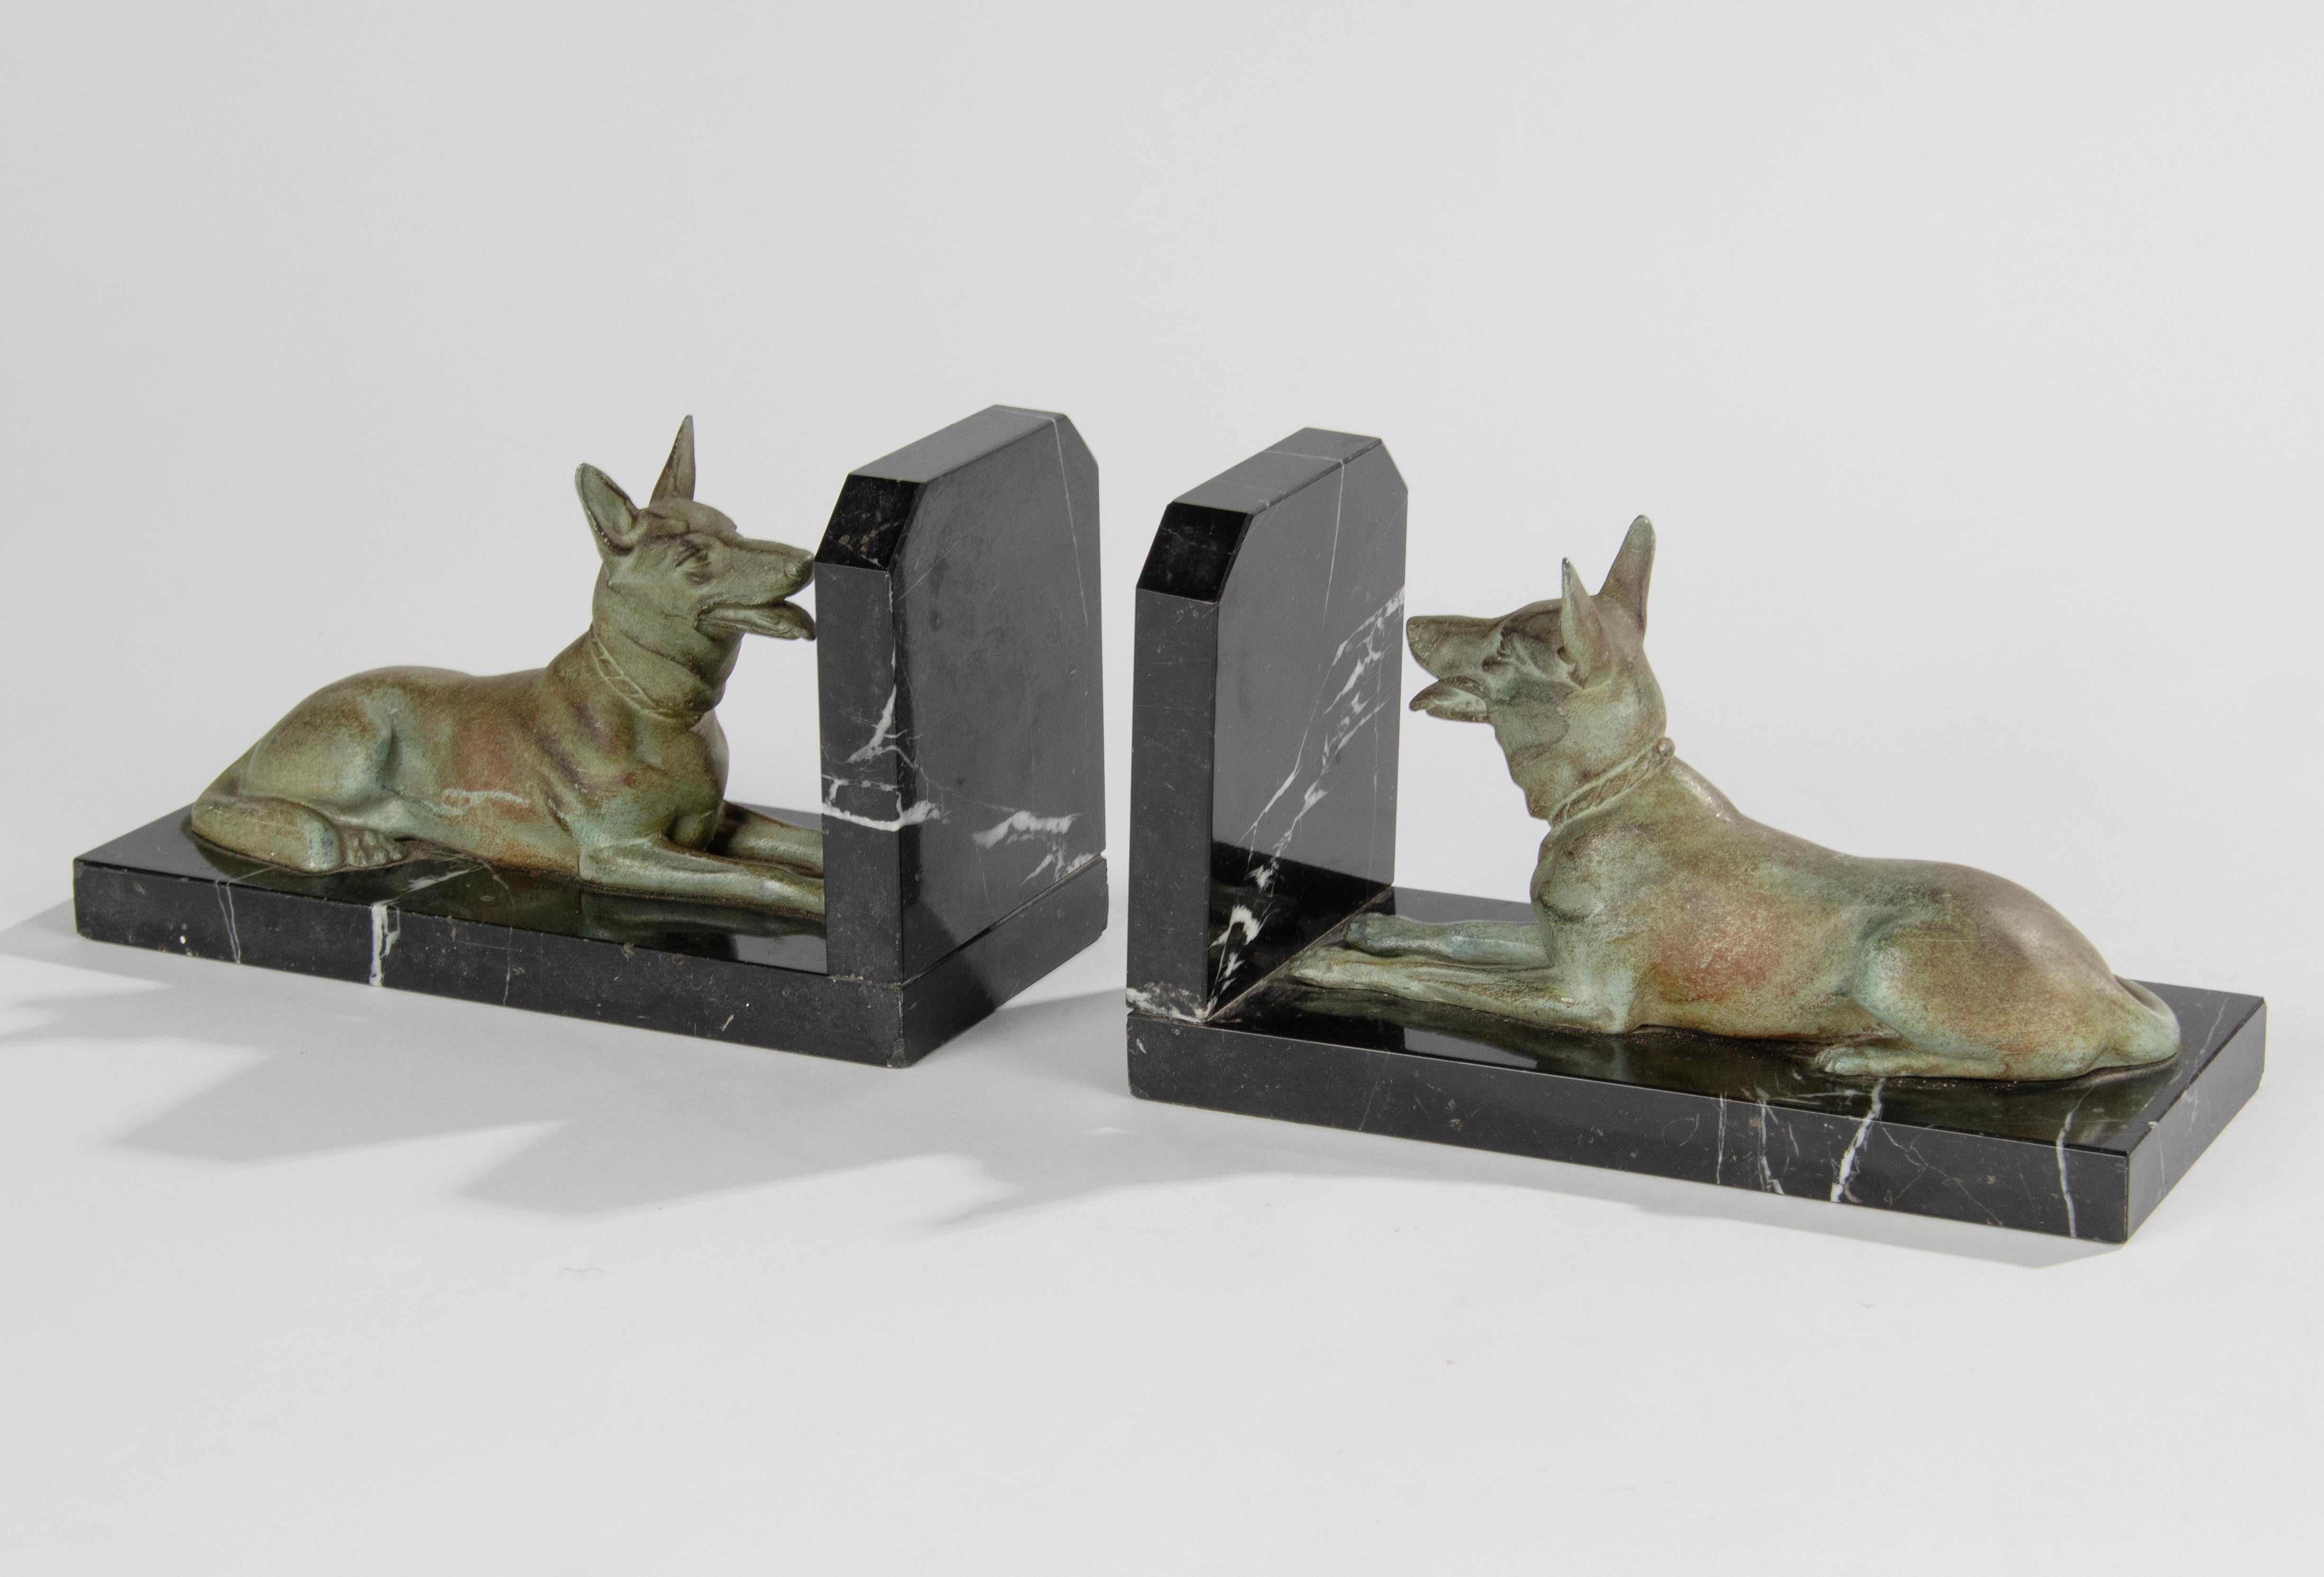 A pair of Art Deco period bookends, with sculptures of German or Belgian shepherd dogs. The figurines are made of green patinated spelter (zinc alloy). The plinths are made of Black marble with white veins. Marble and figurines are in good